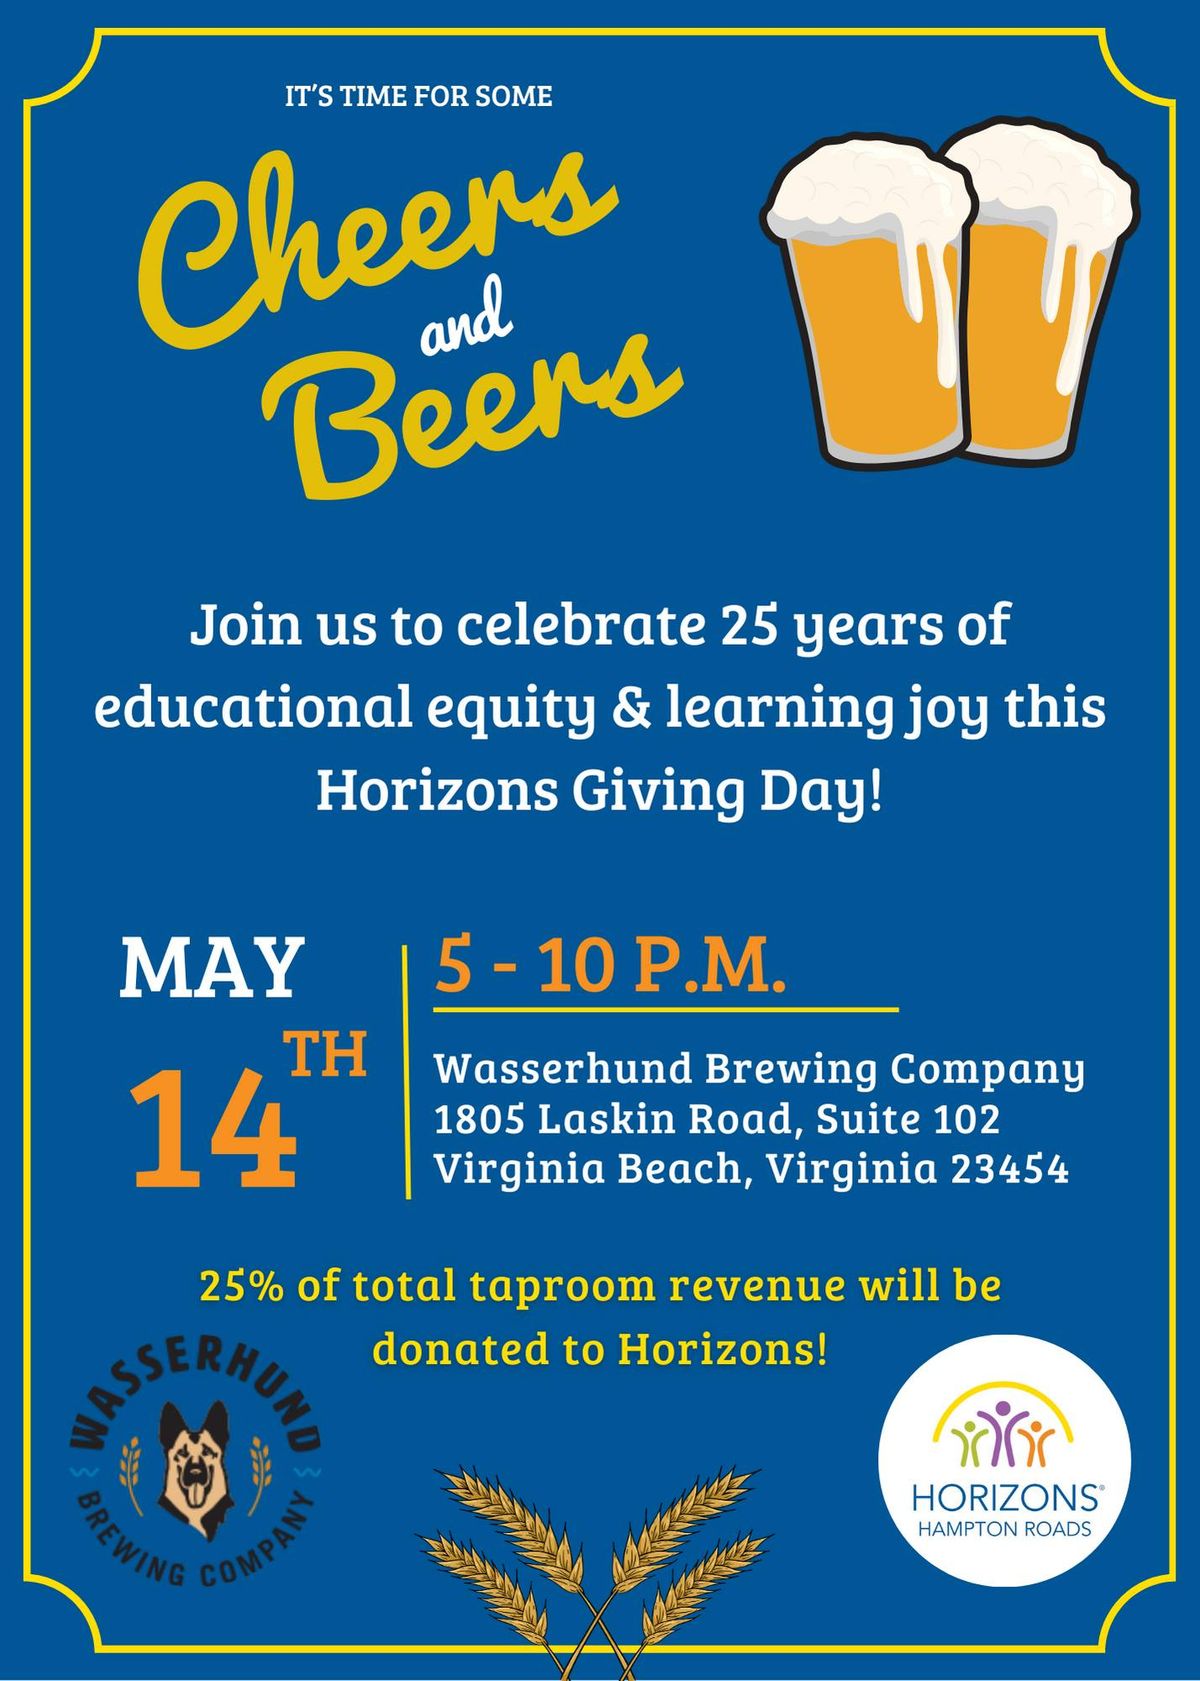 Horizons Giving Day - Cheers & Beers